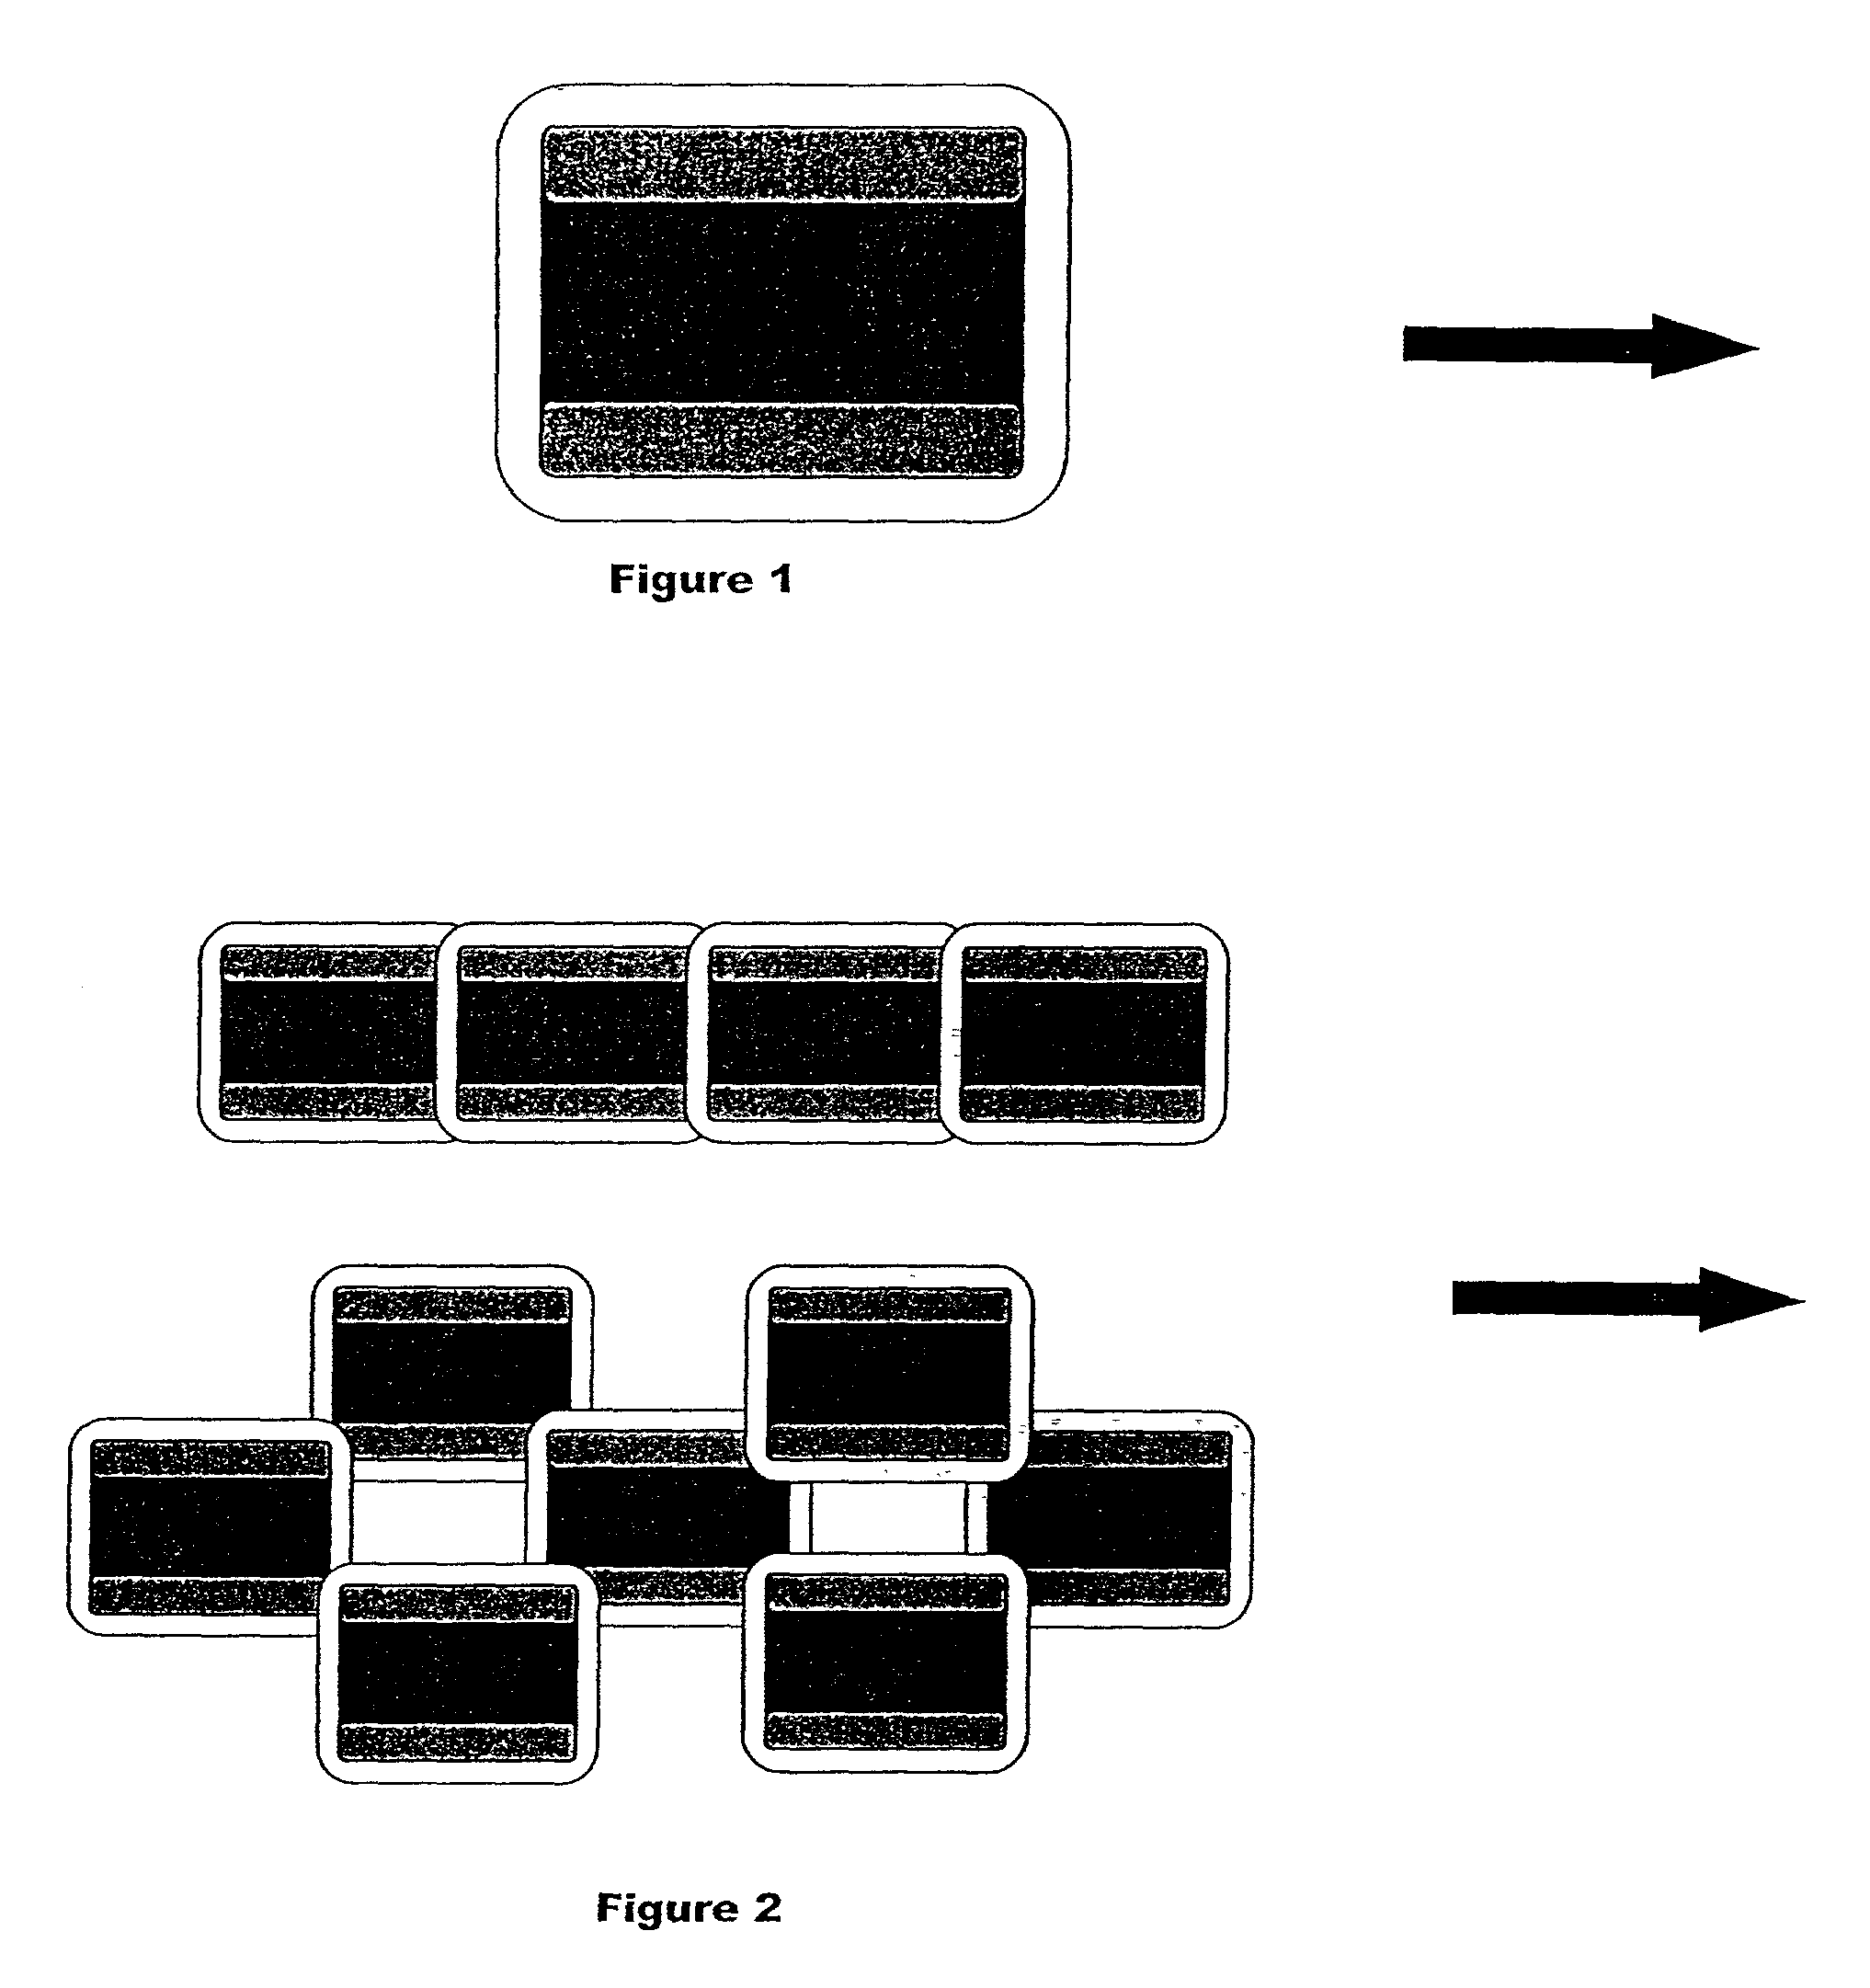 Microdevices having a preferential axis of magnetization and uses thereof